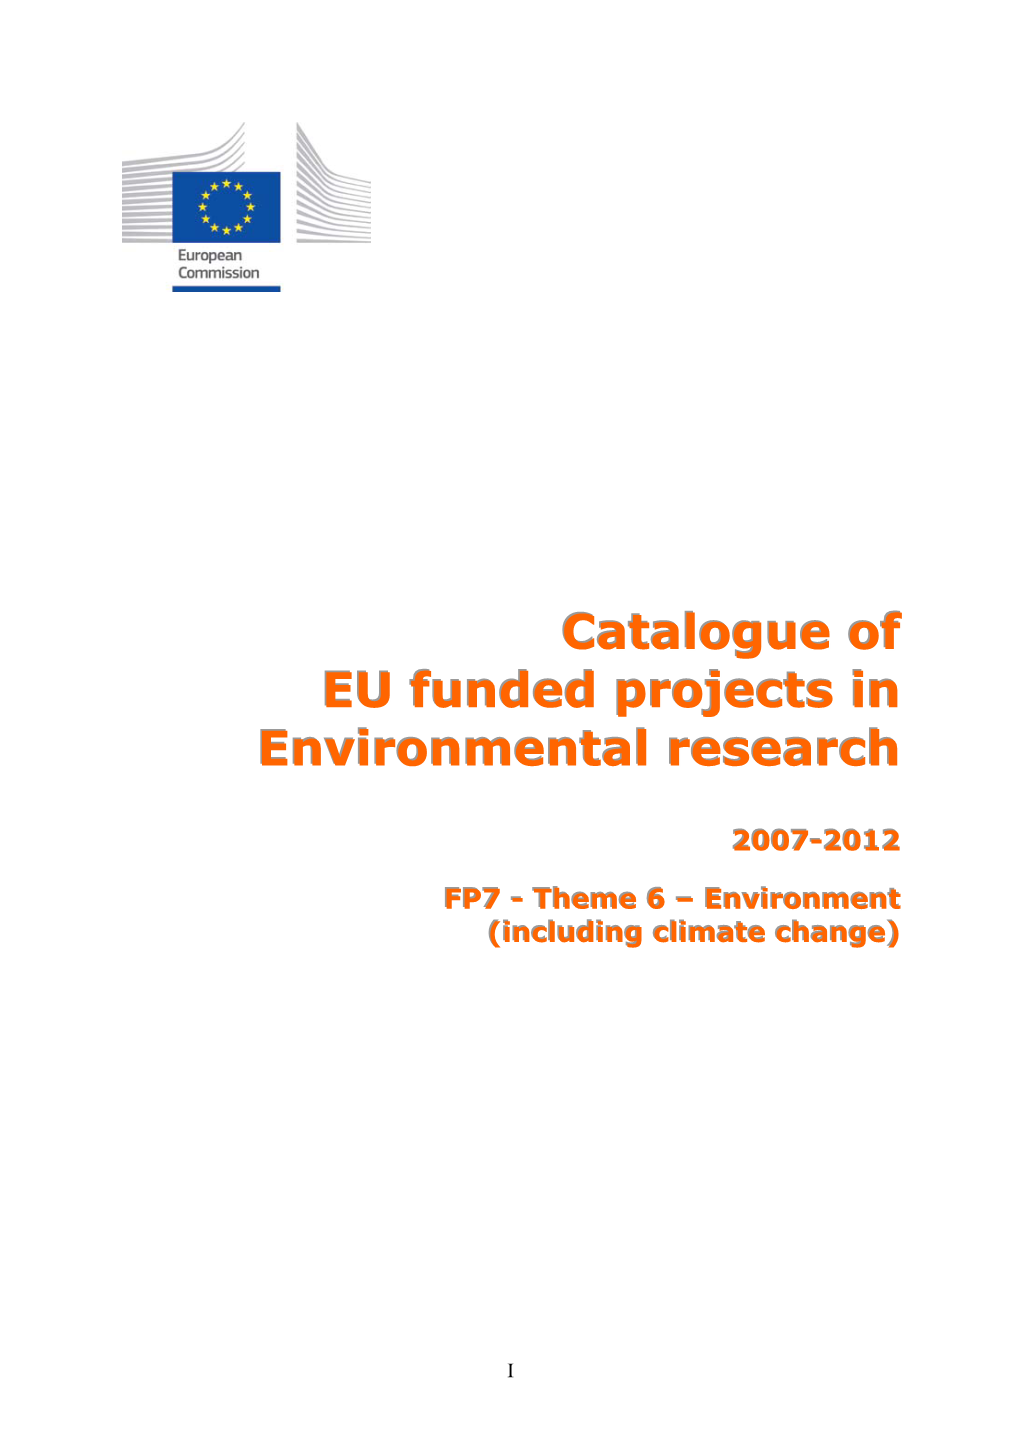 Catalogue of EU Funded Projects in Environmental Research (2007-2012)